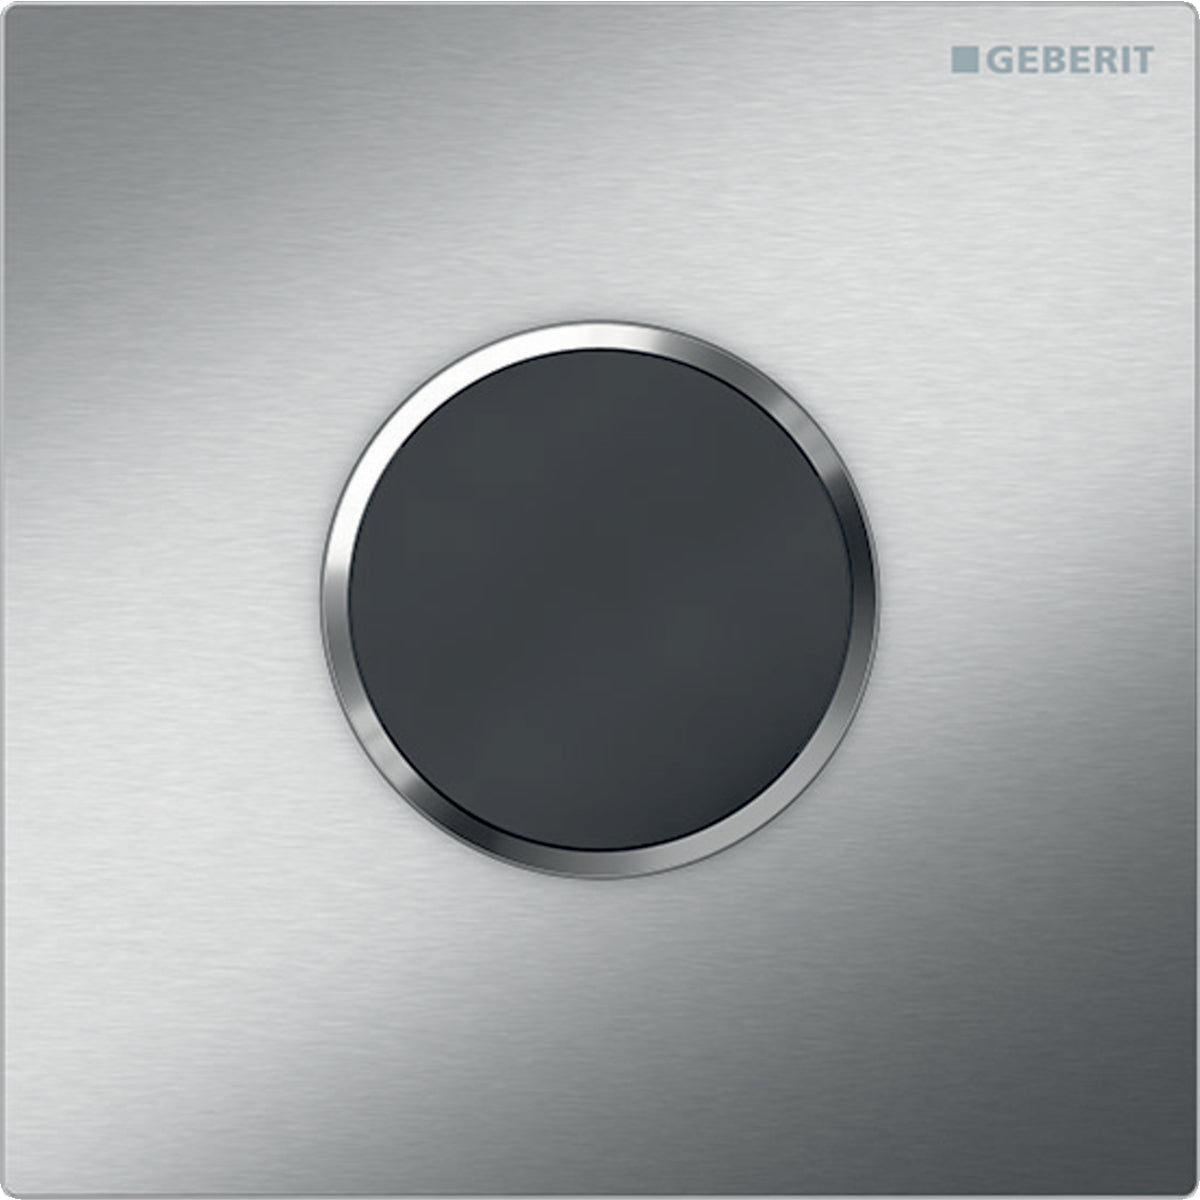 Geberit Urinal Flush Control with Electronic Flush Actuation, Battery Operation and Type 10 Cover Plate